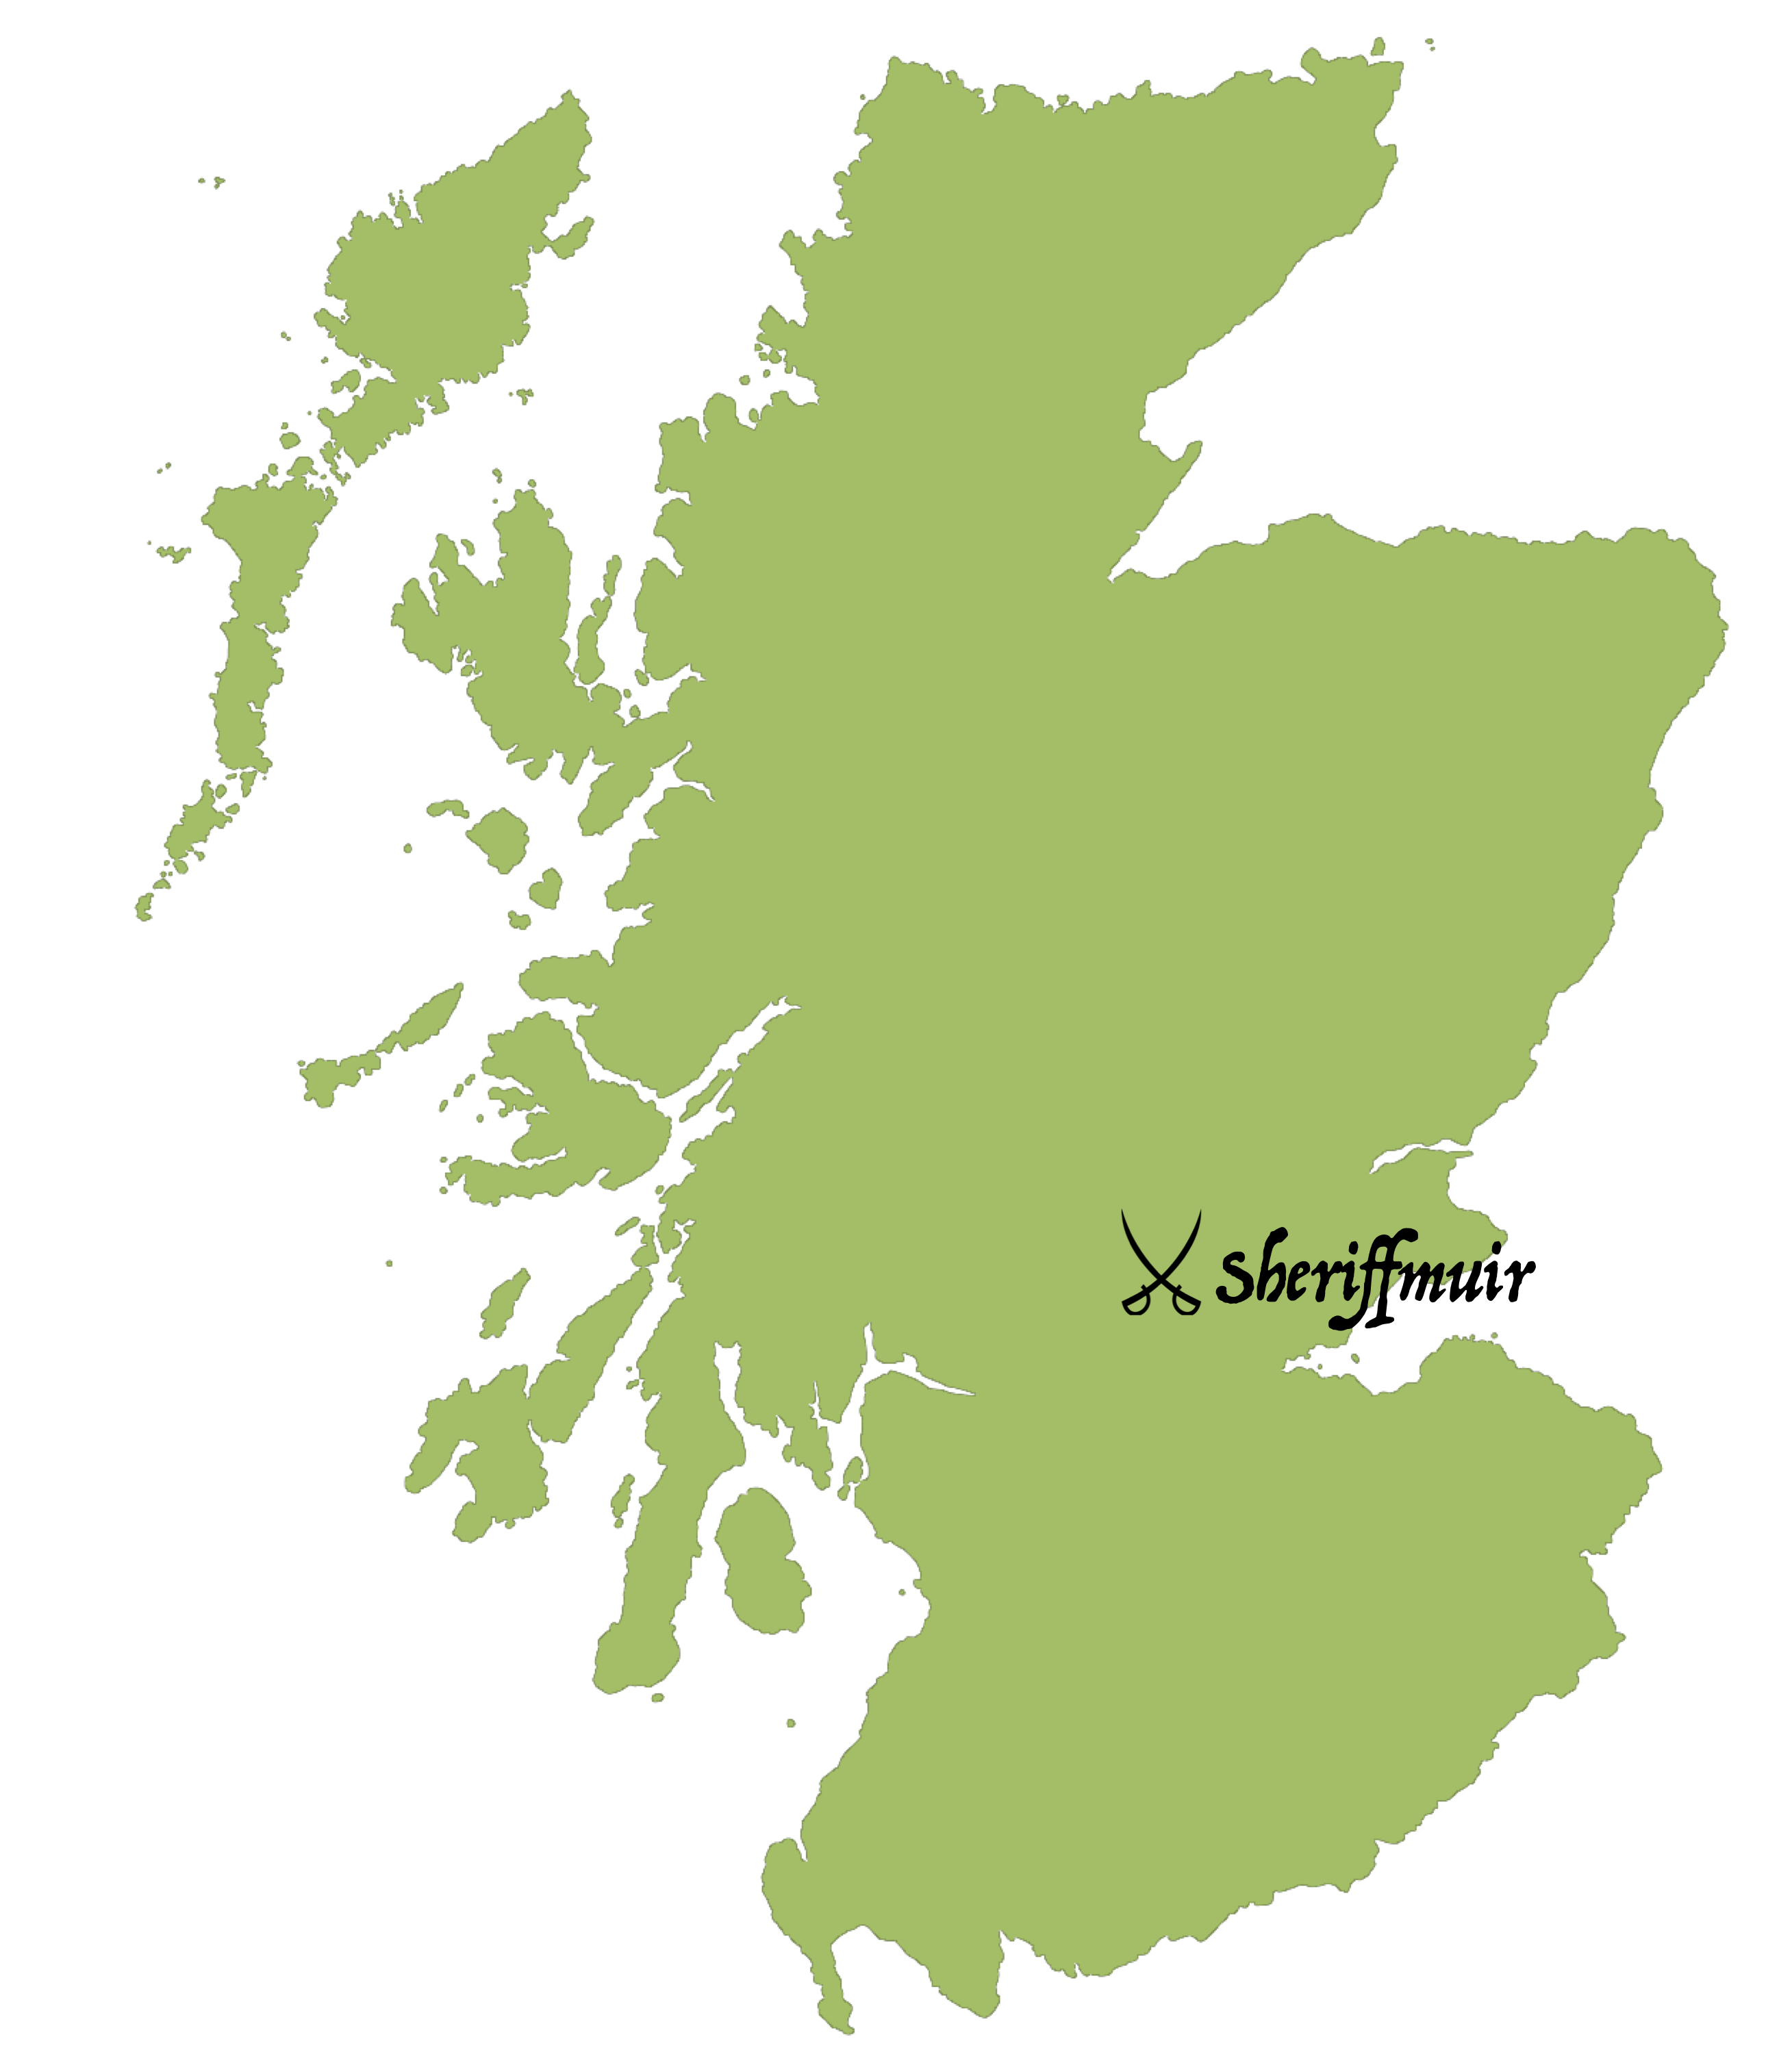 Location of Sheriffmuir battlefield on a map of Scotland.